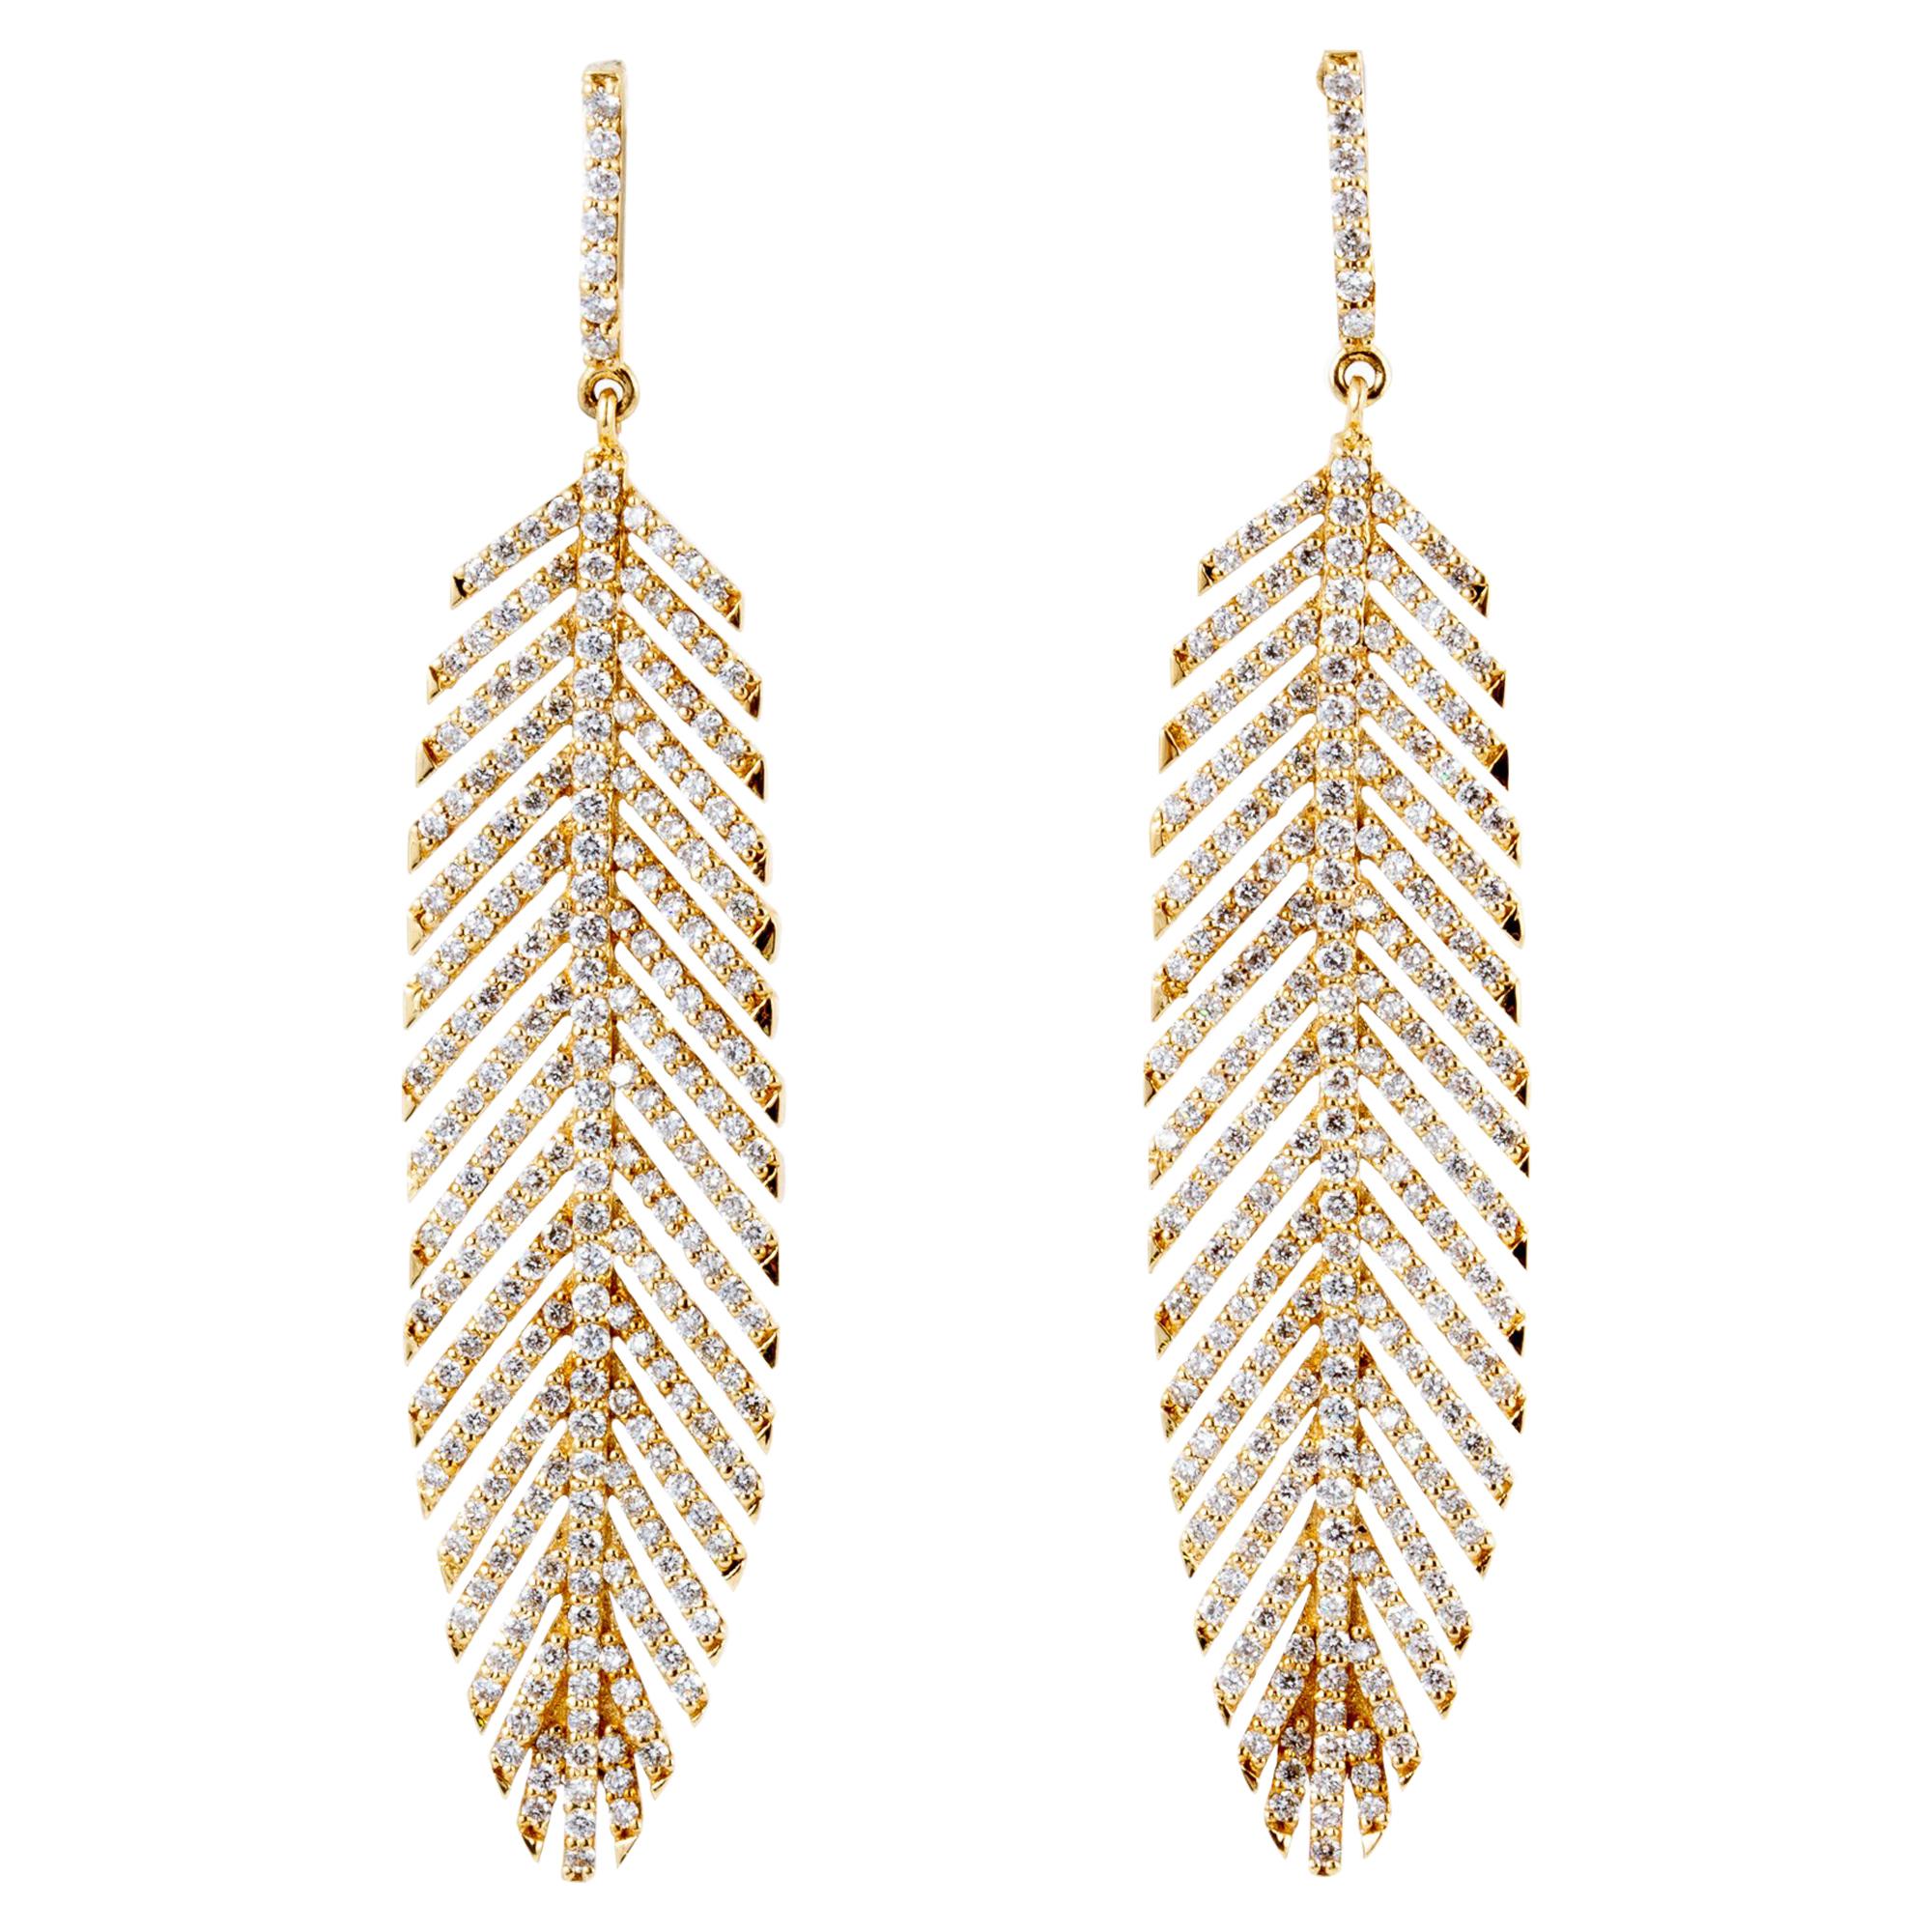 18 Carat Handcrafted Feather Earrings with 3 Carat of Diamonds